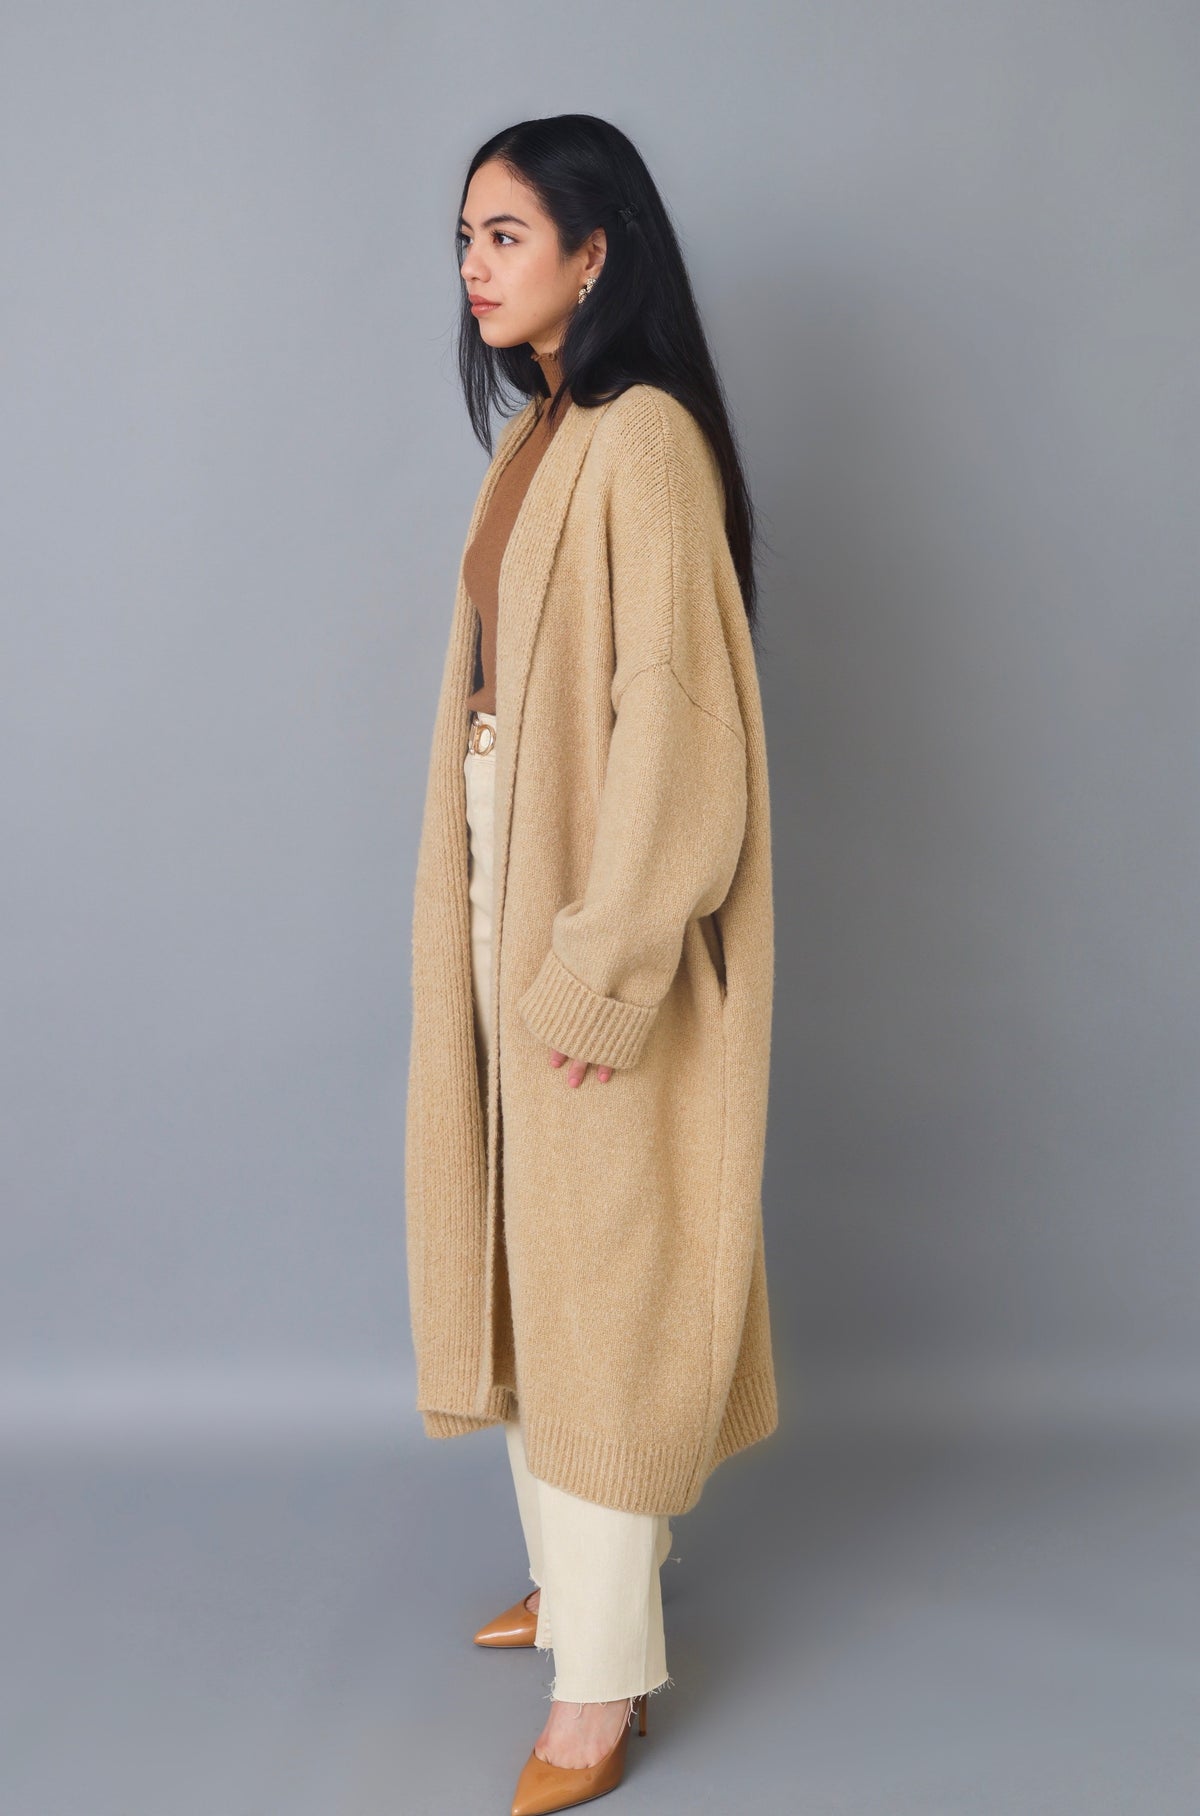 Trendy-Chic Tan Oversize Cardigan Duster Sweater